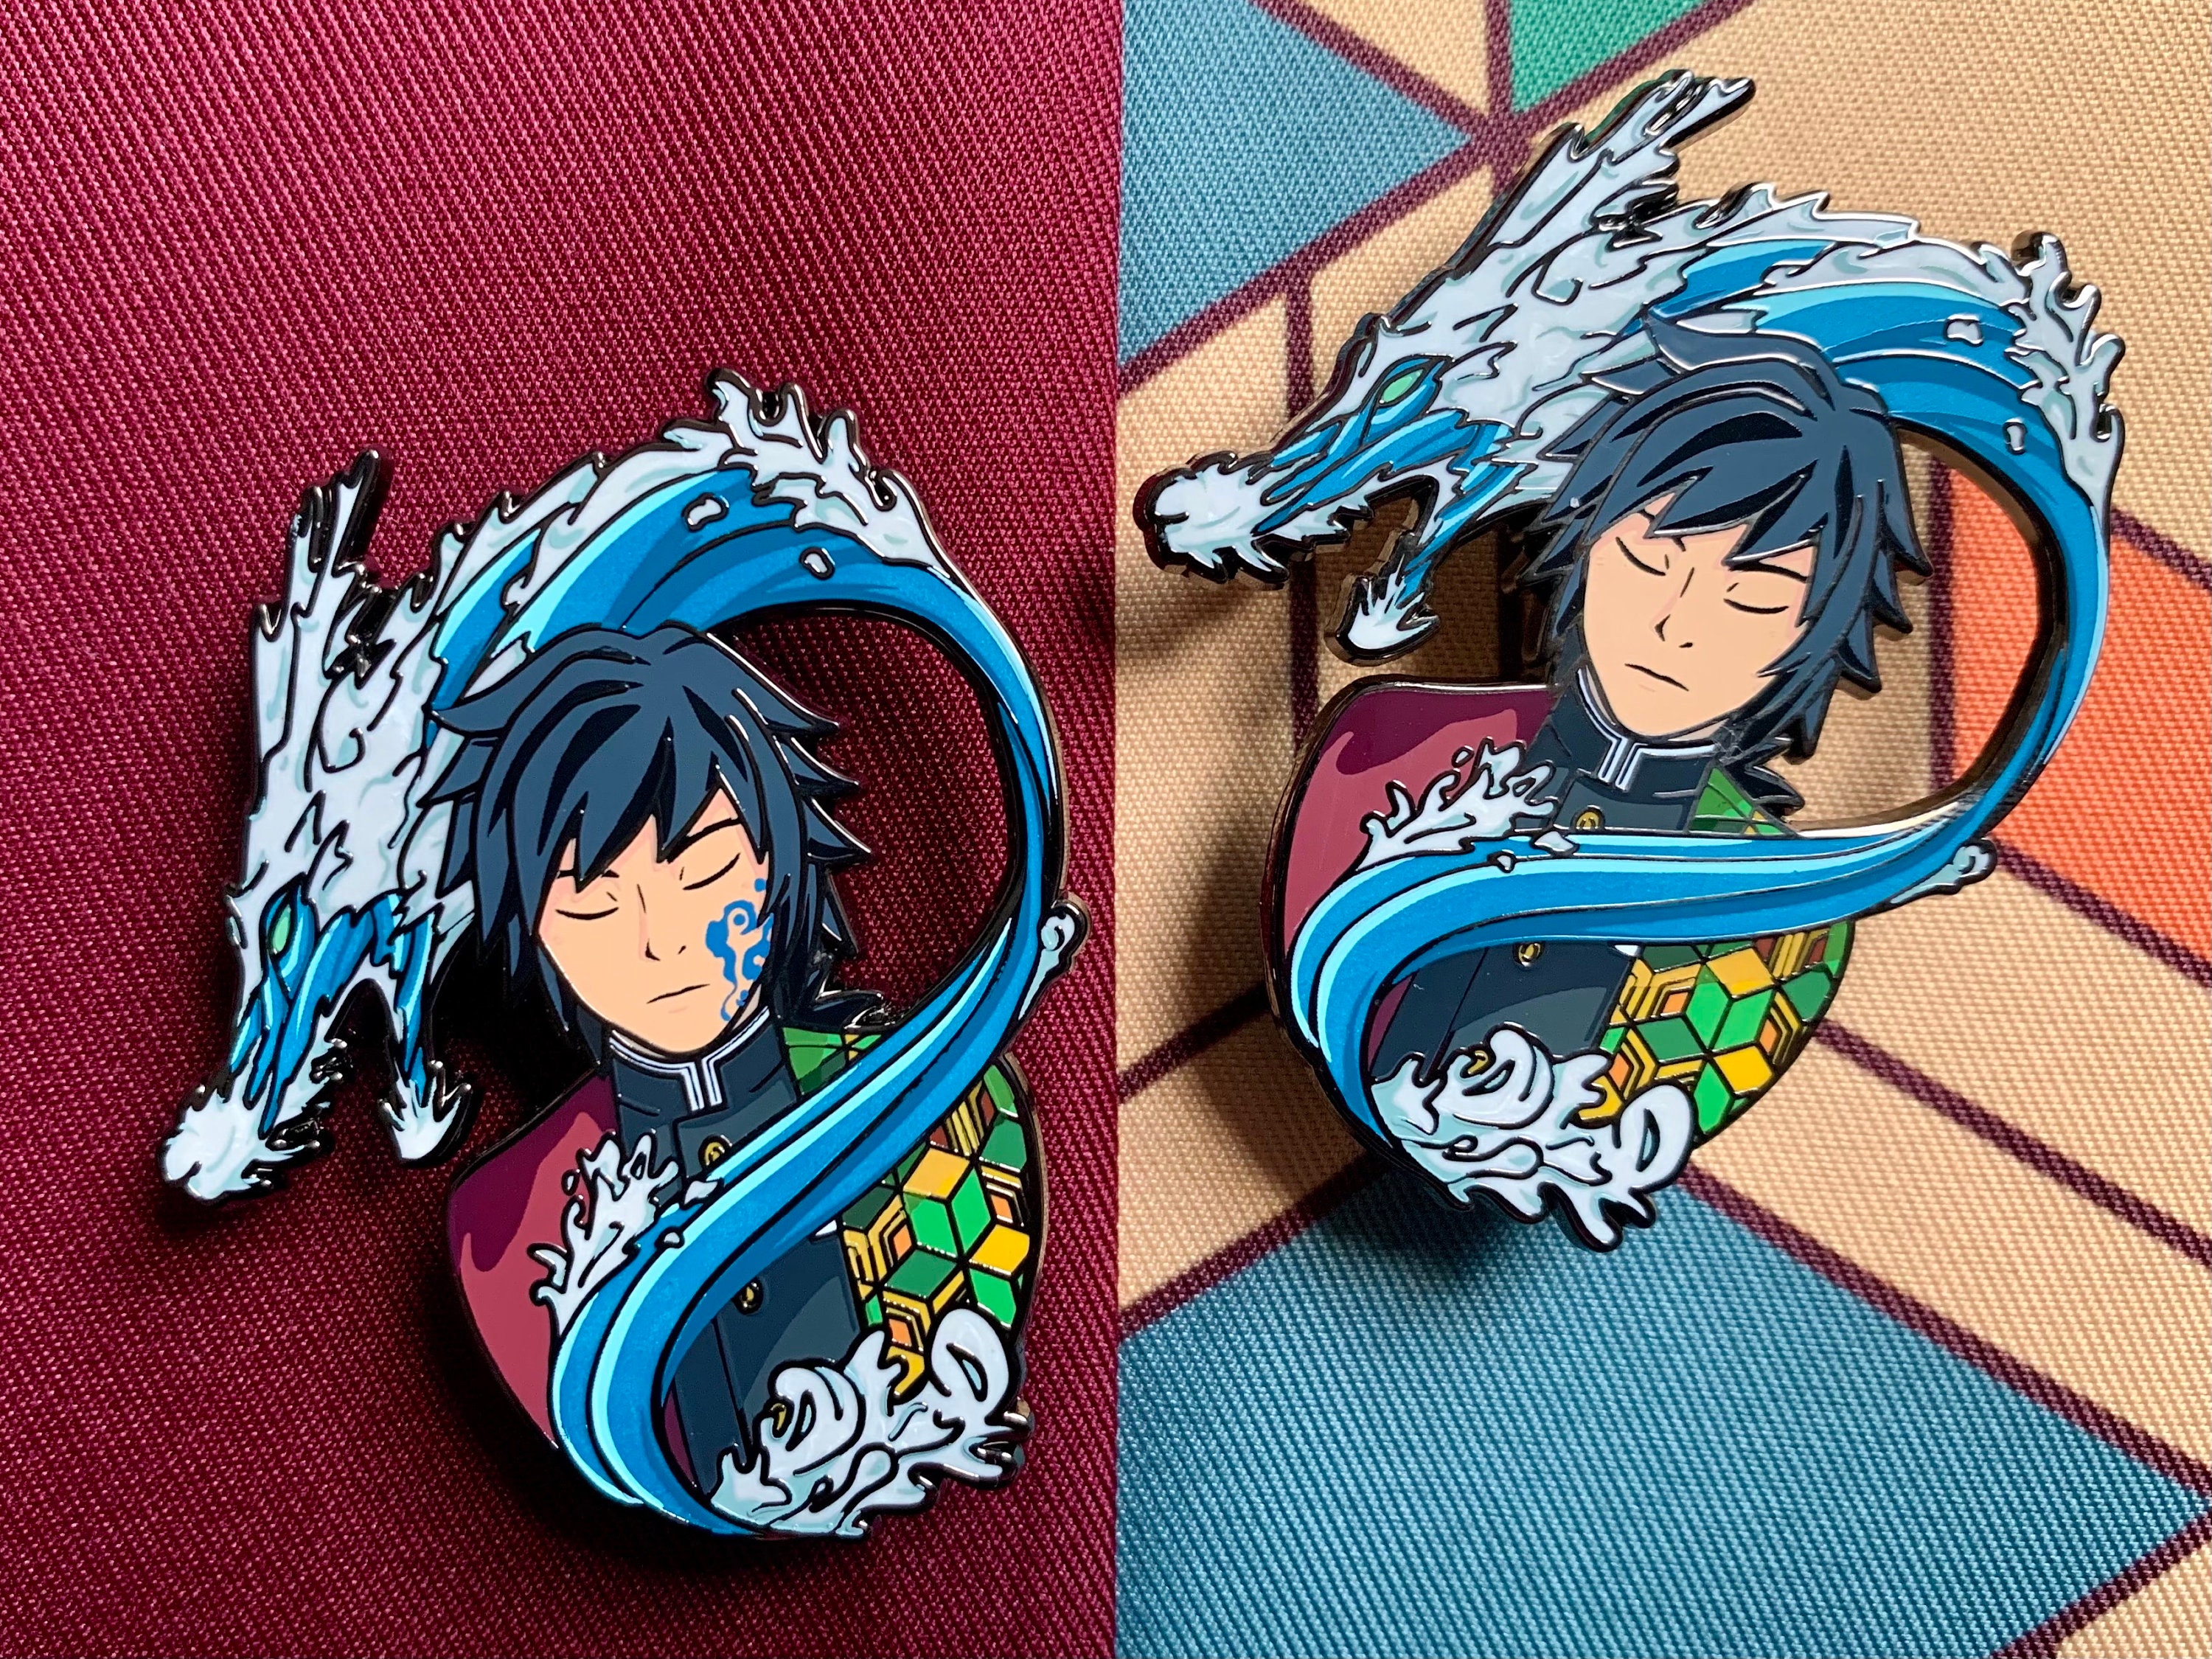  Great Eastern Entertainment Demon Slayer- Tanjiro Pin:  Clothing, Shoes & Jewelry